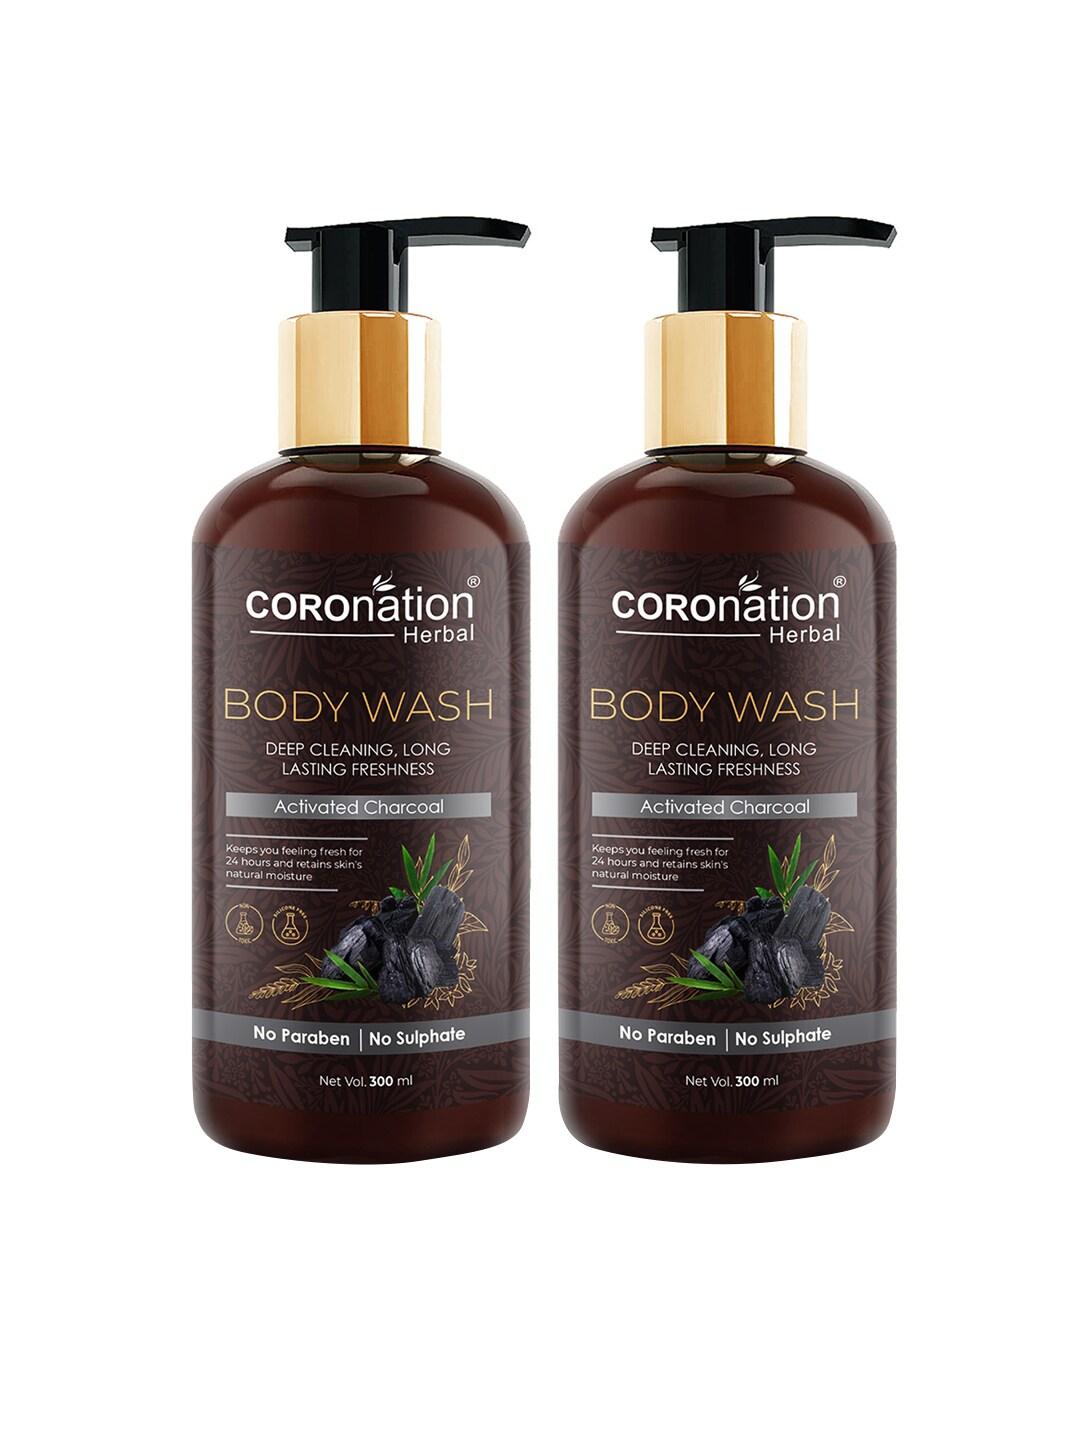 COROnation Herbal Set of 2 Activated Charcoal Body Wash 300 ml Each